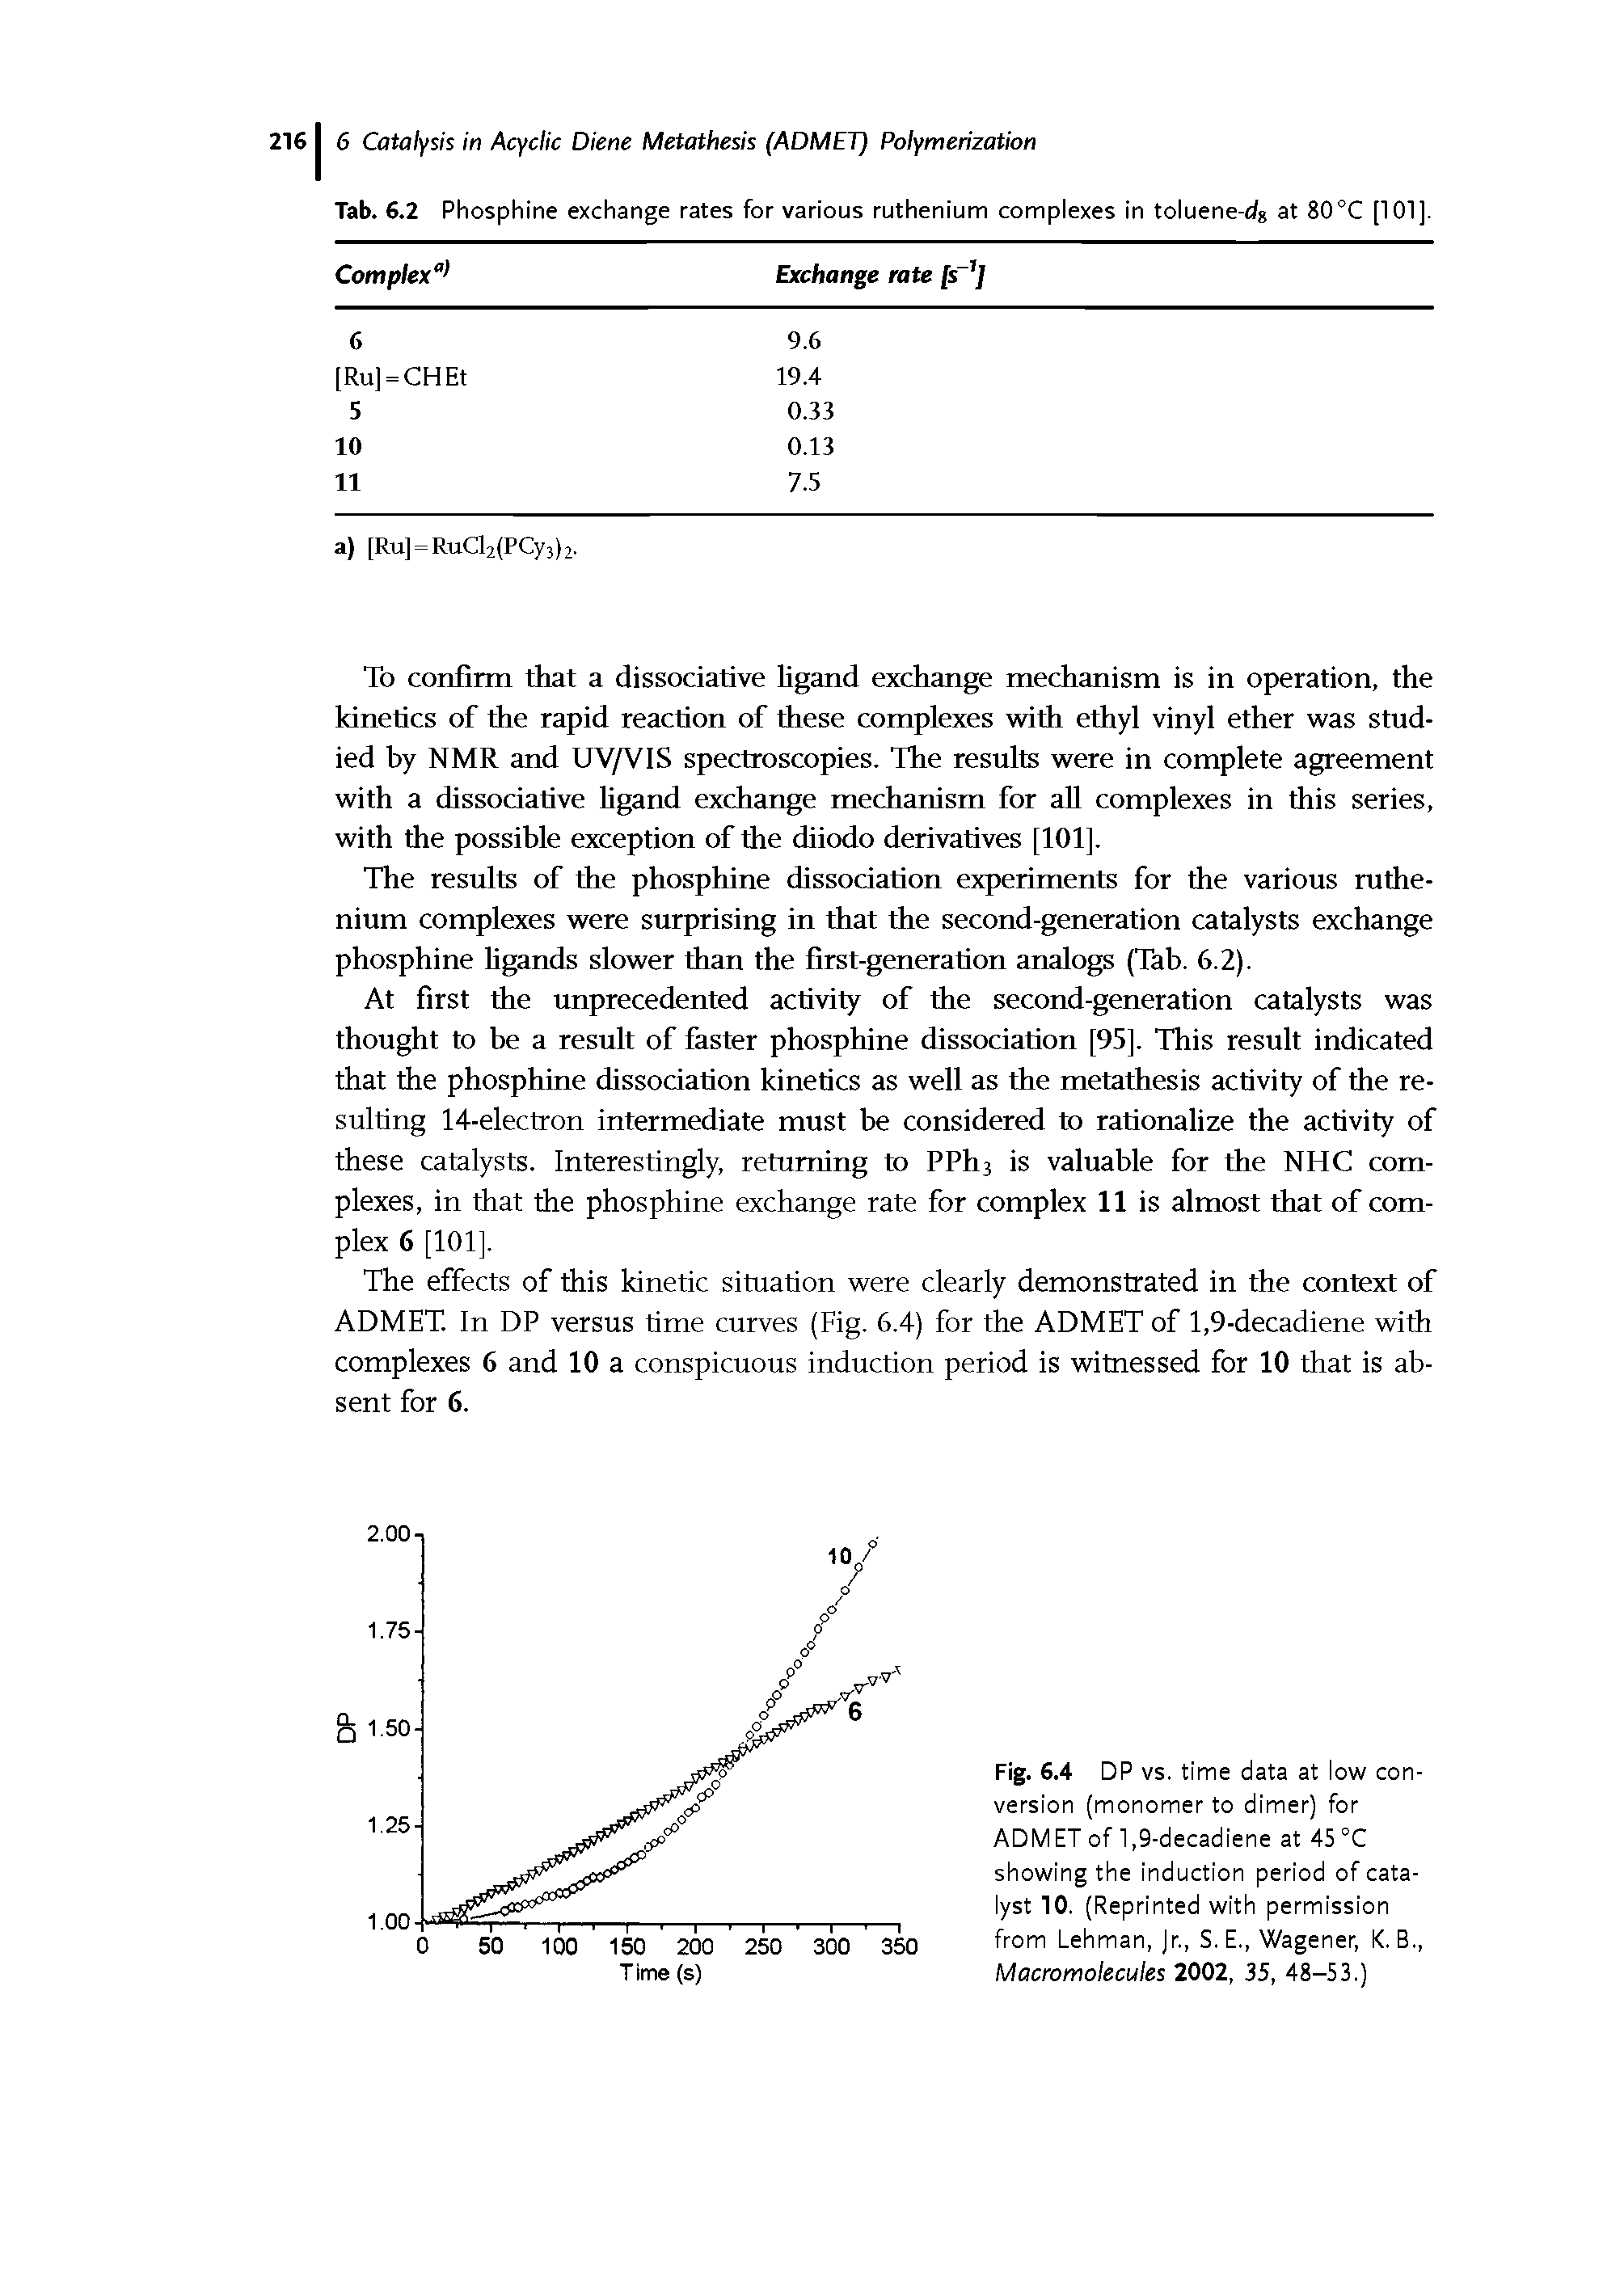 Fig. 6.4 DP vs. time data at low conversion (monomer to dimer) for ADMET of 1,9-decadiene at 45 °C showing the induction period of catalyst 10. (Reprinted with permission from Lehman, Jr., S. E., Wagener, K. B., Macromolecules 2002, 35, 48-53.)...